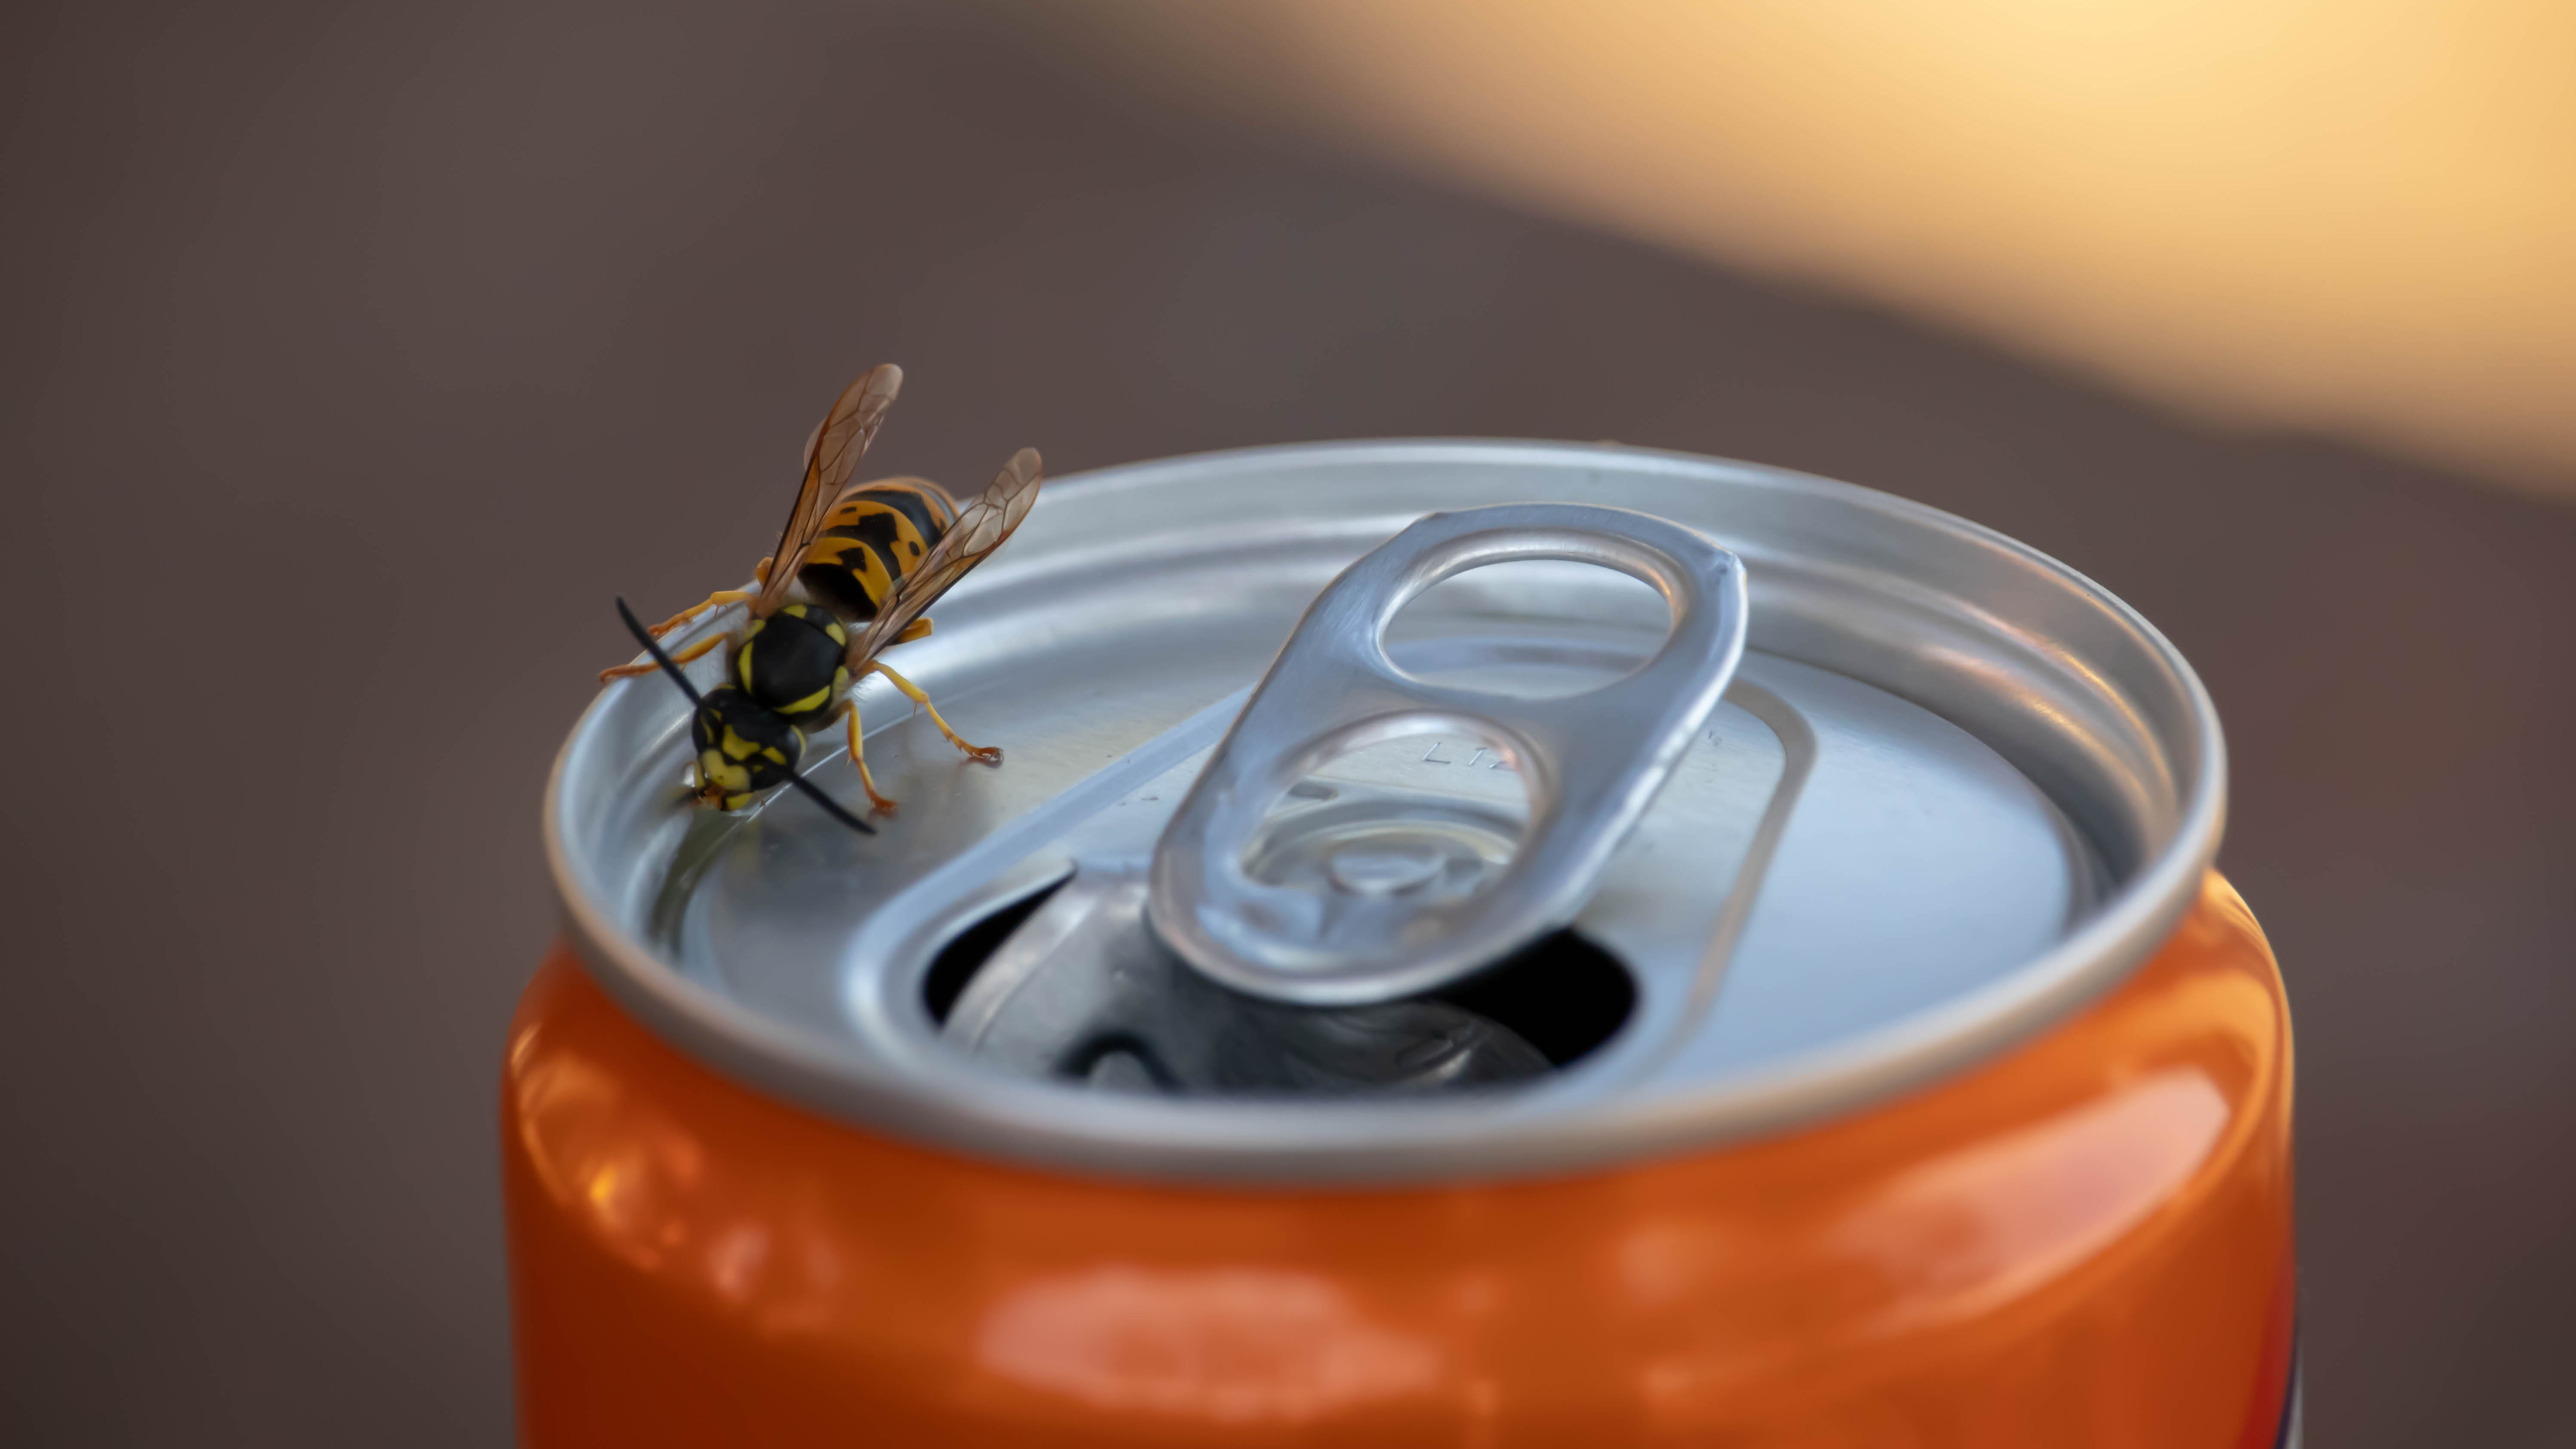 A wasp on top of a can of soda